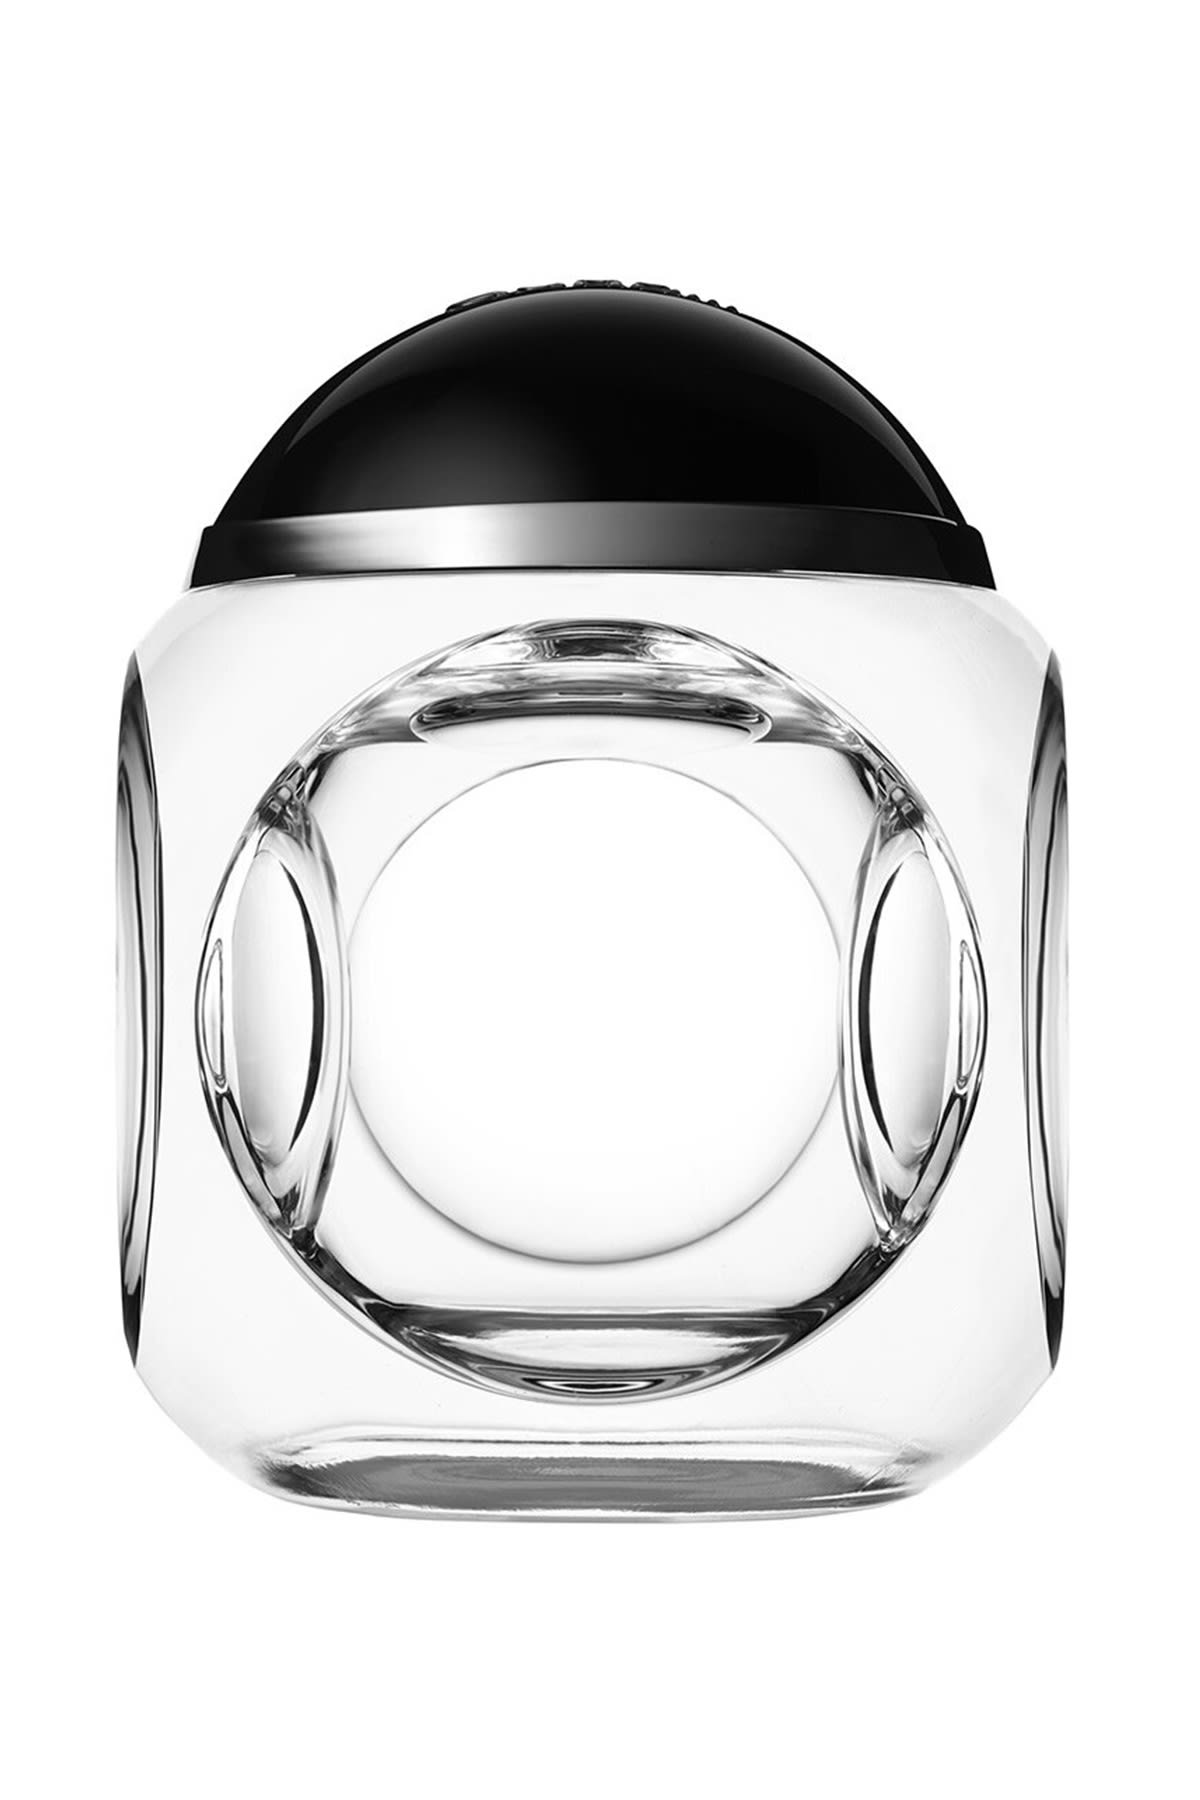 Close-up full frame front view of a Dunhill Century fragrance bottle.